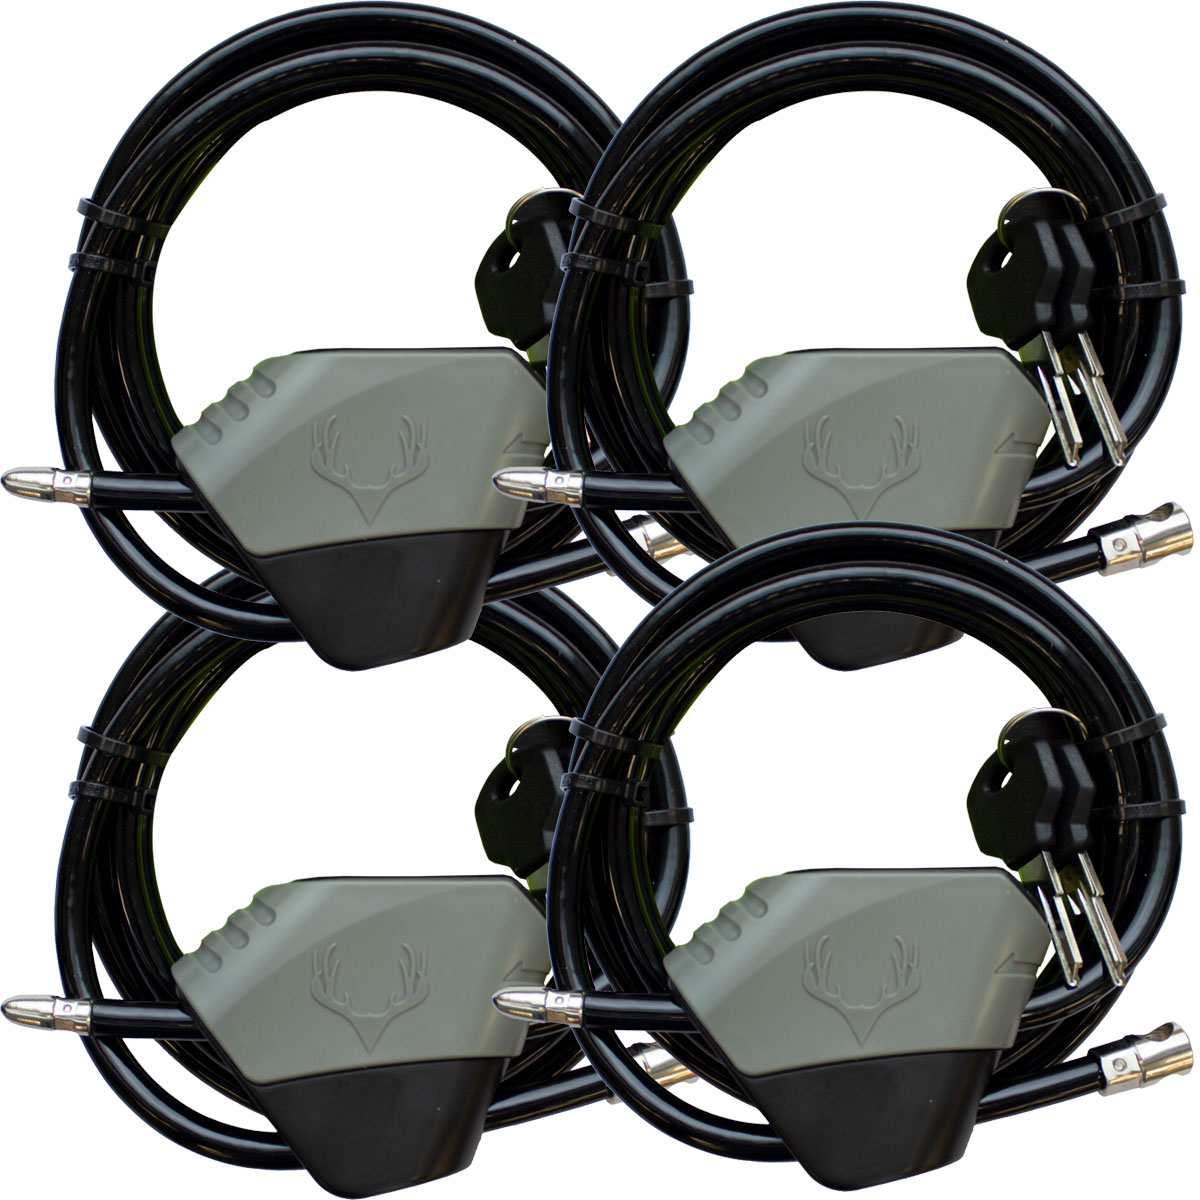 HME CABLE LOCK 4 PACK - ALL SAME KEY main photo.